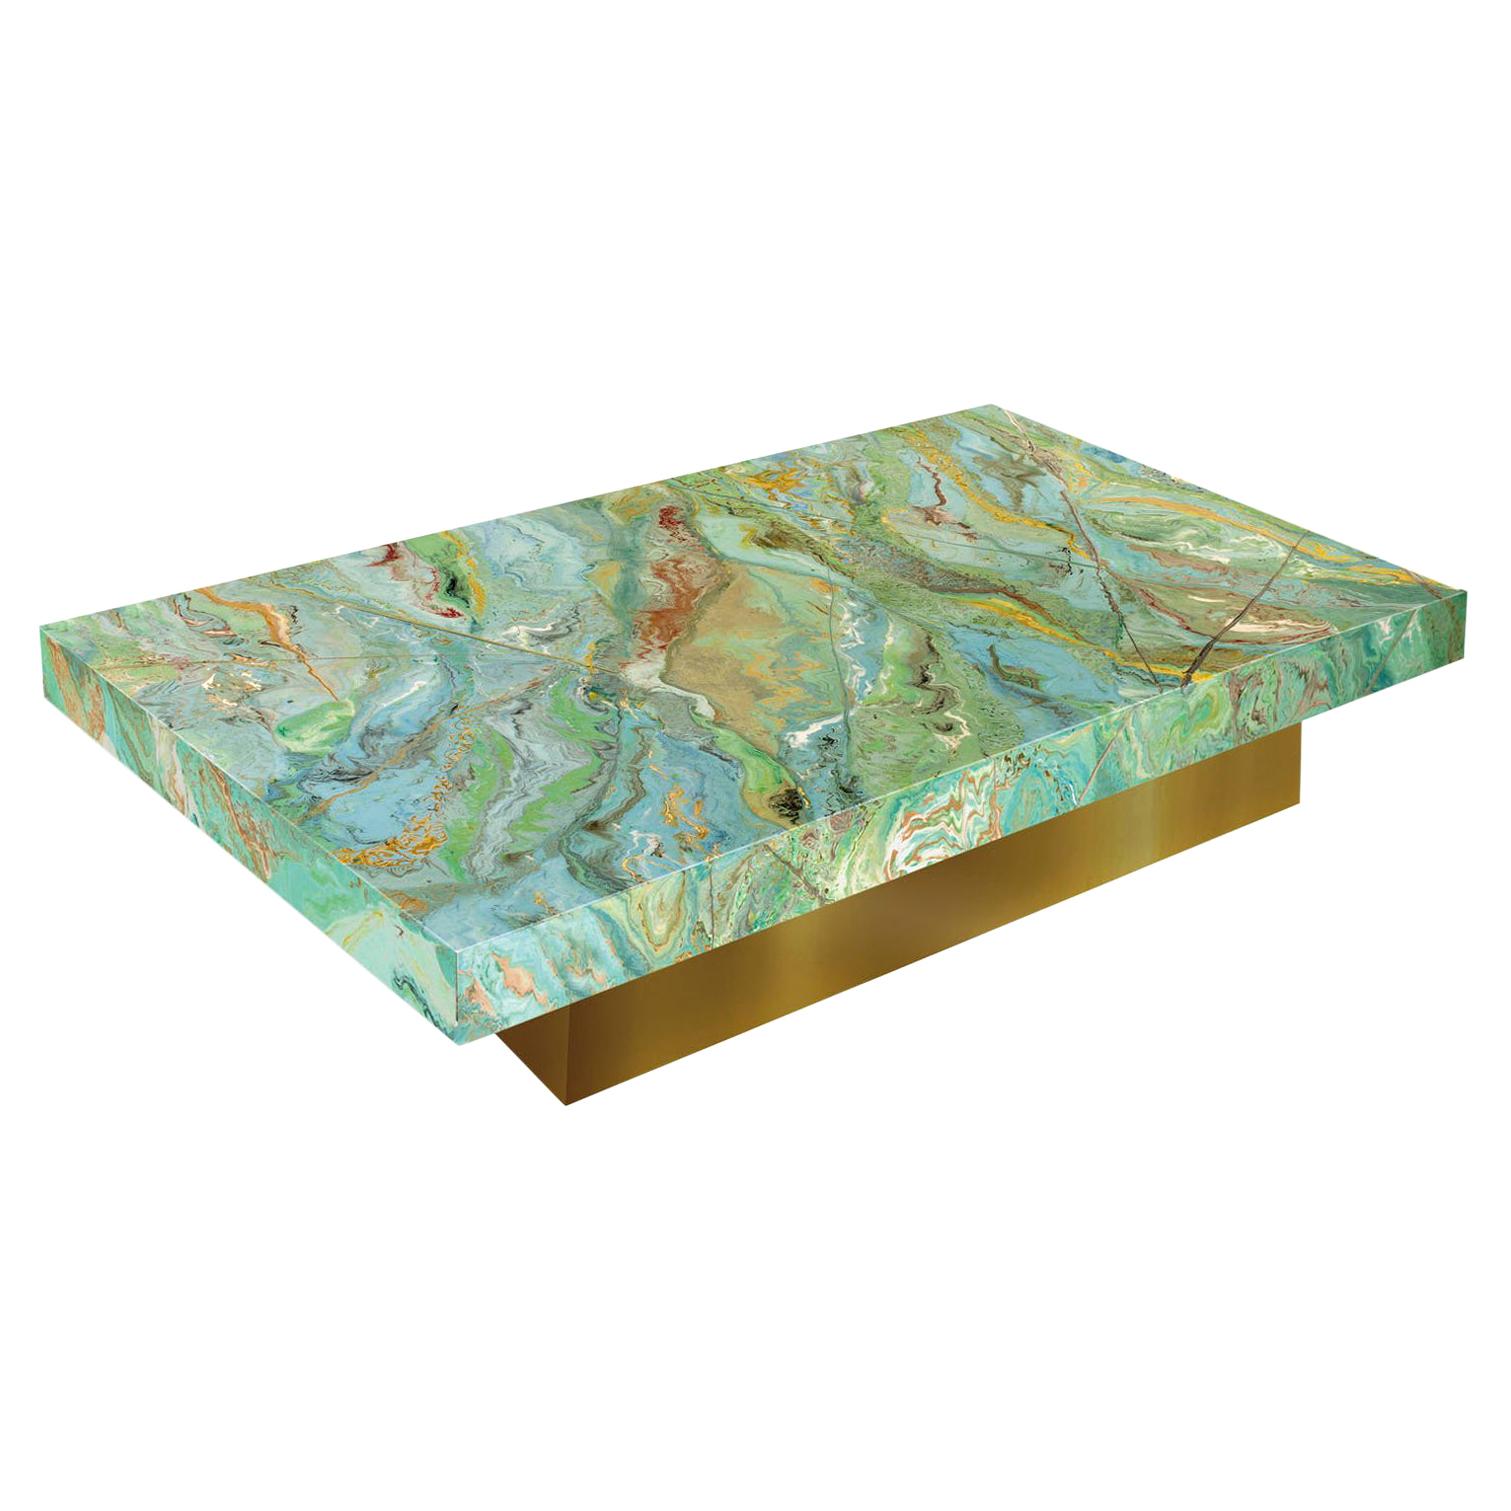 Coffee table green scagliola art top gold wood base handmade in Italy by Cupioli For Sale